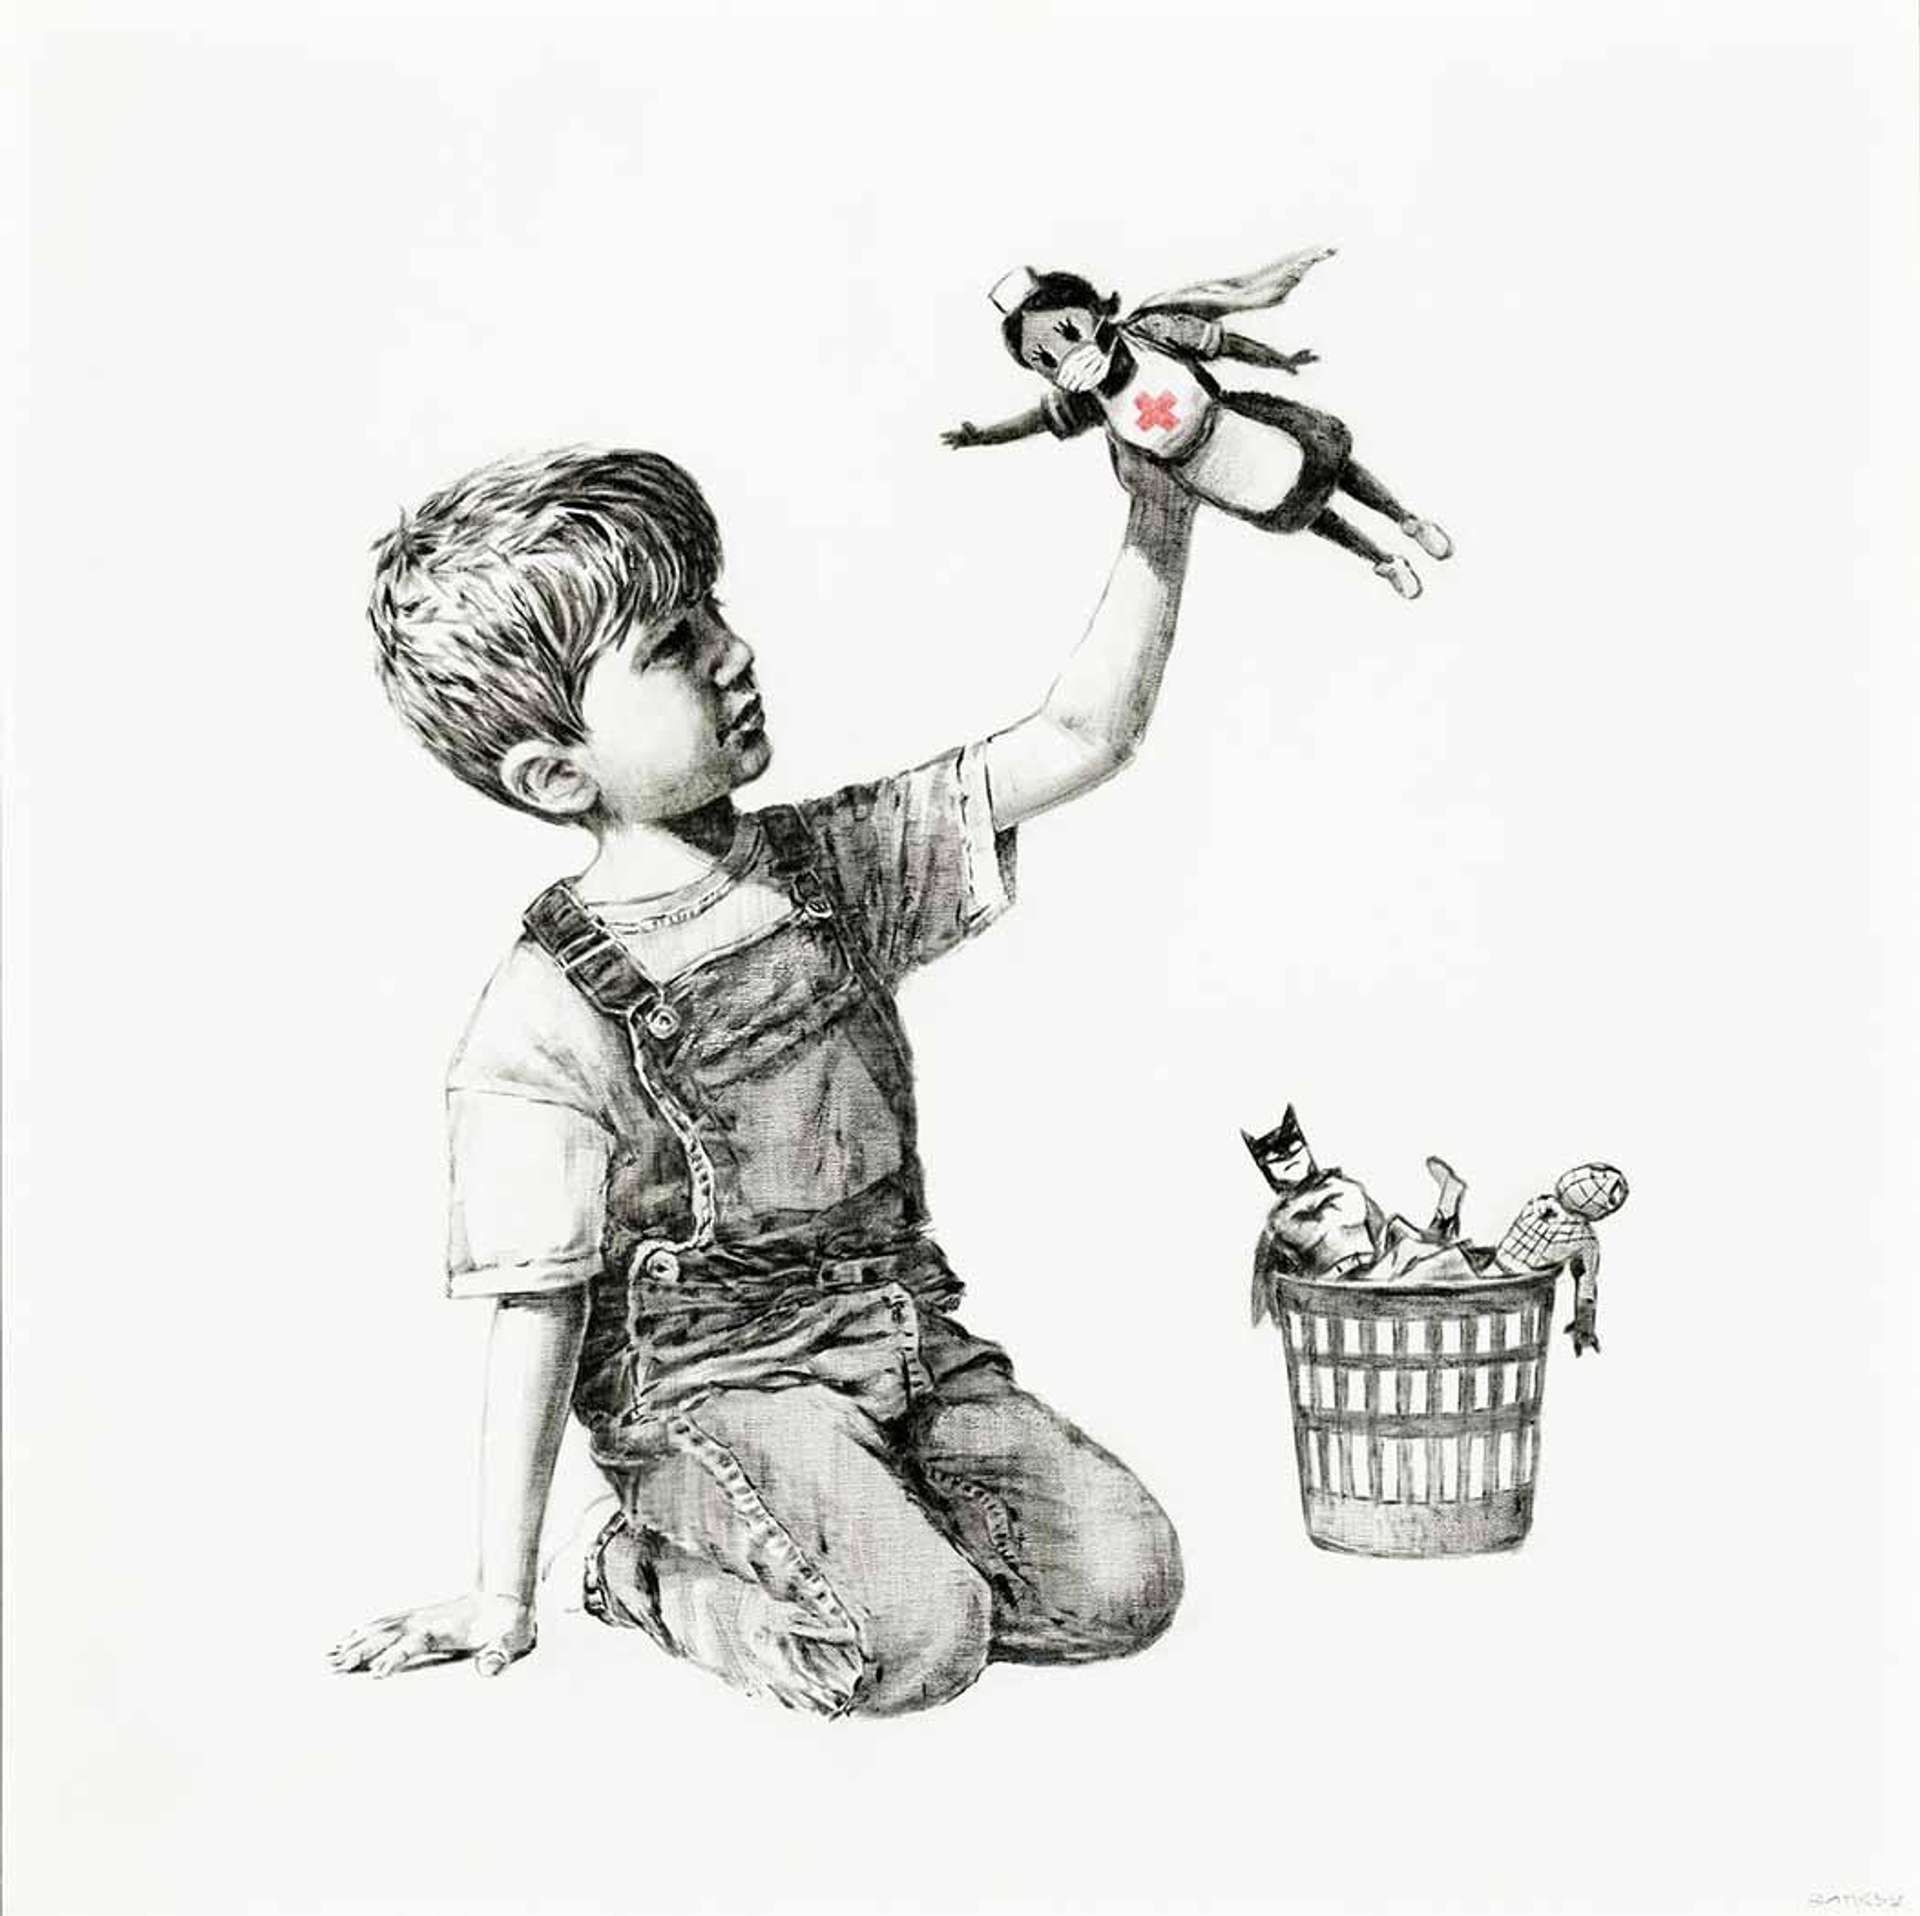 A young boy in dungarees depicted in black and white, playing with a toy wearing a nurse's uniform with a red cross.